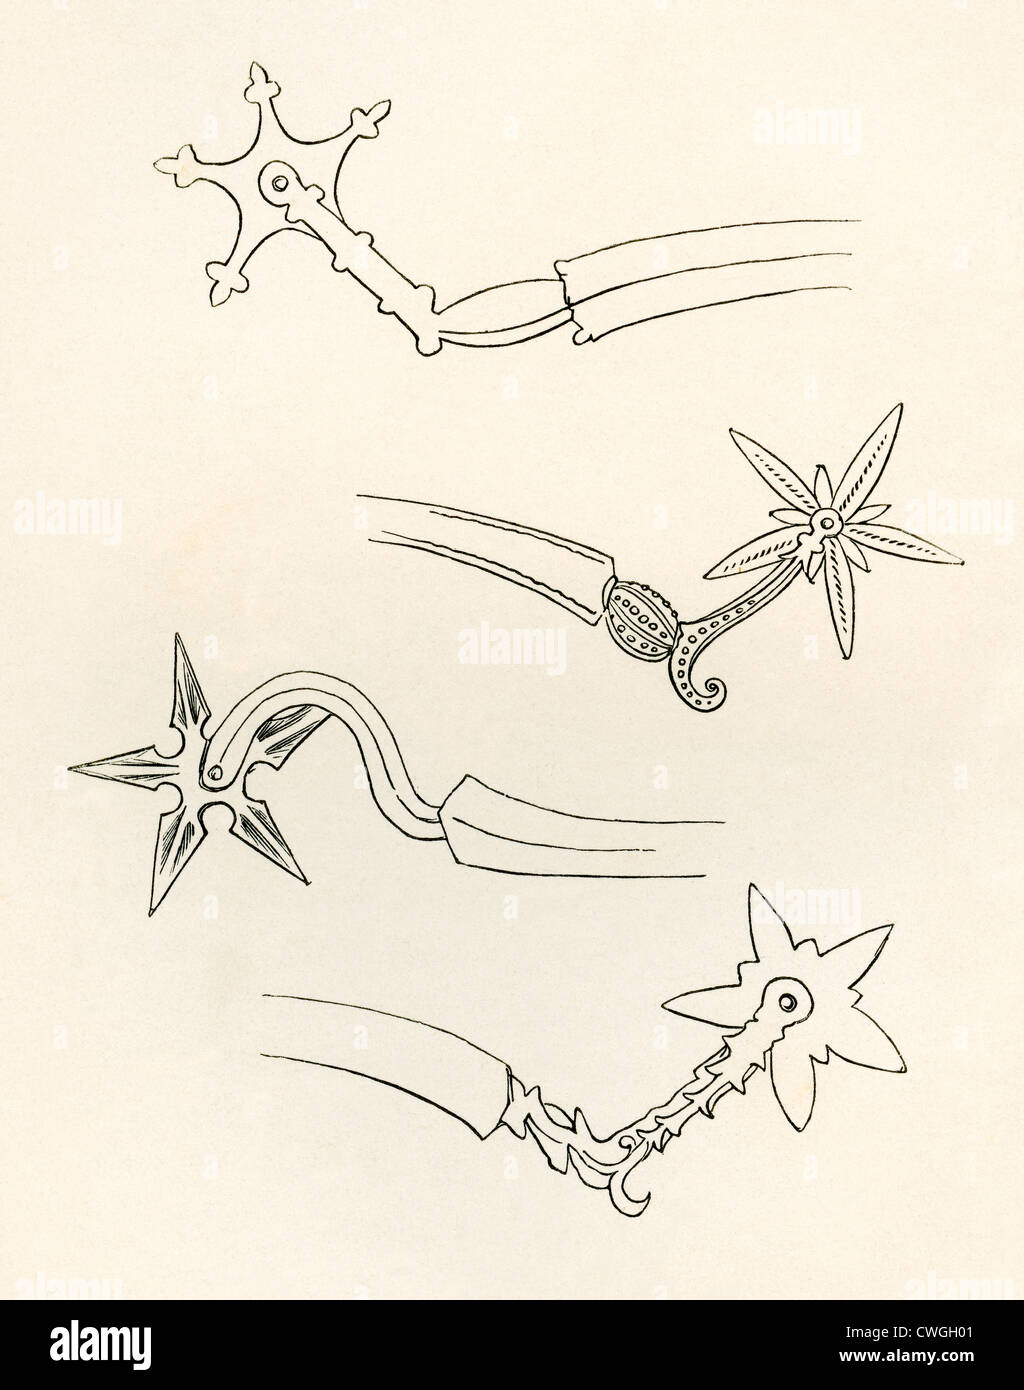 Various spurs dating from c. 1600. From The British Army: Its Origins, Progress and Equipment, published 1868. Stock Photo